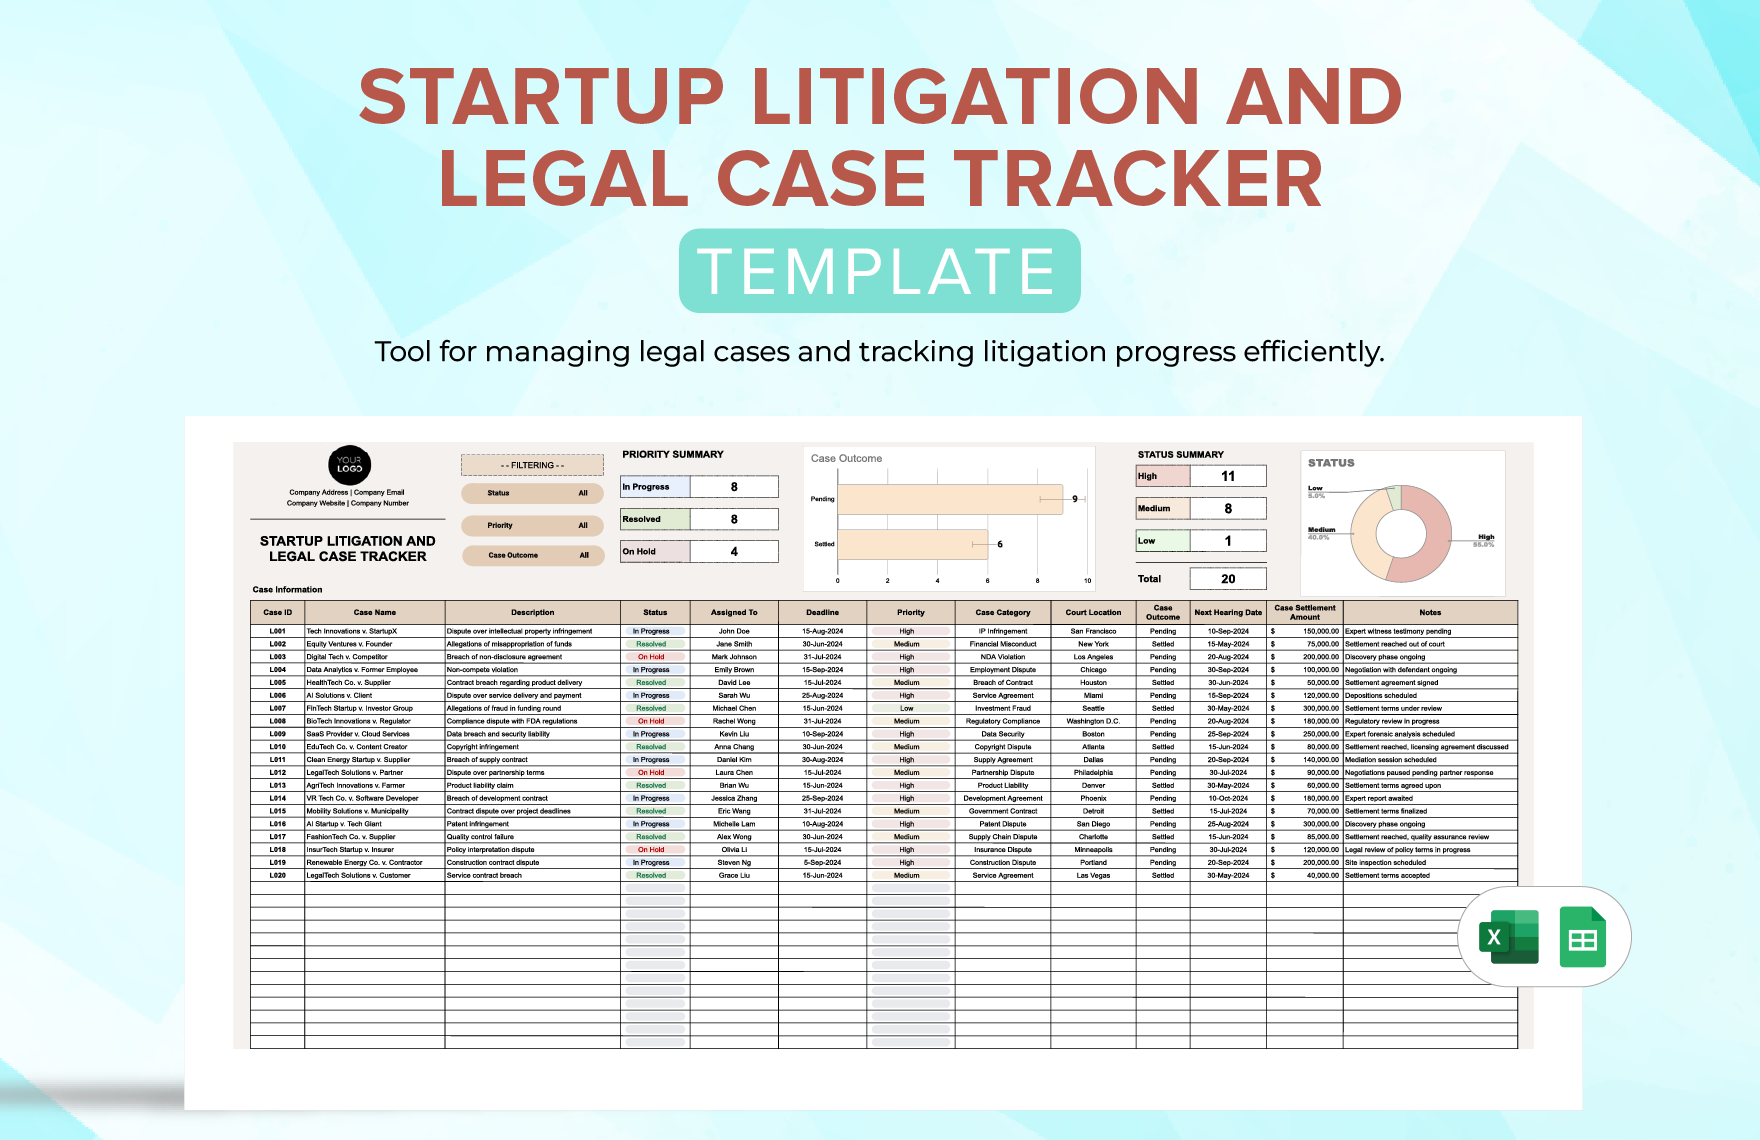 Startup Litigation and Legal Case Tracker Template in Excel, Google Sheets